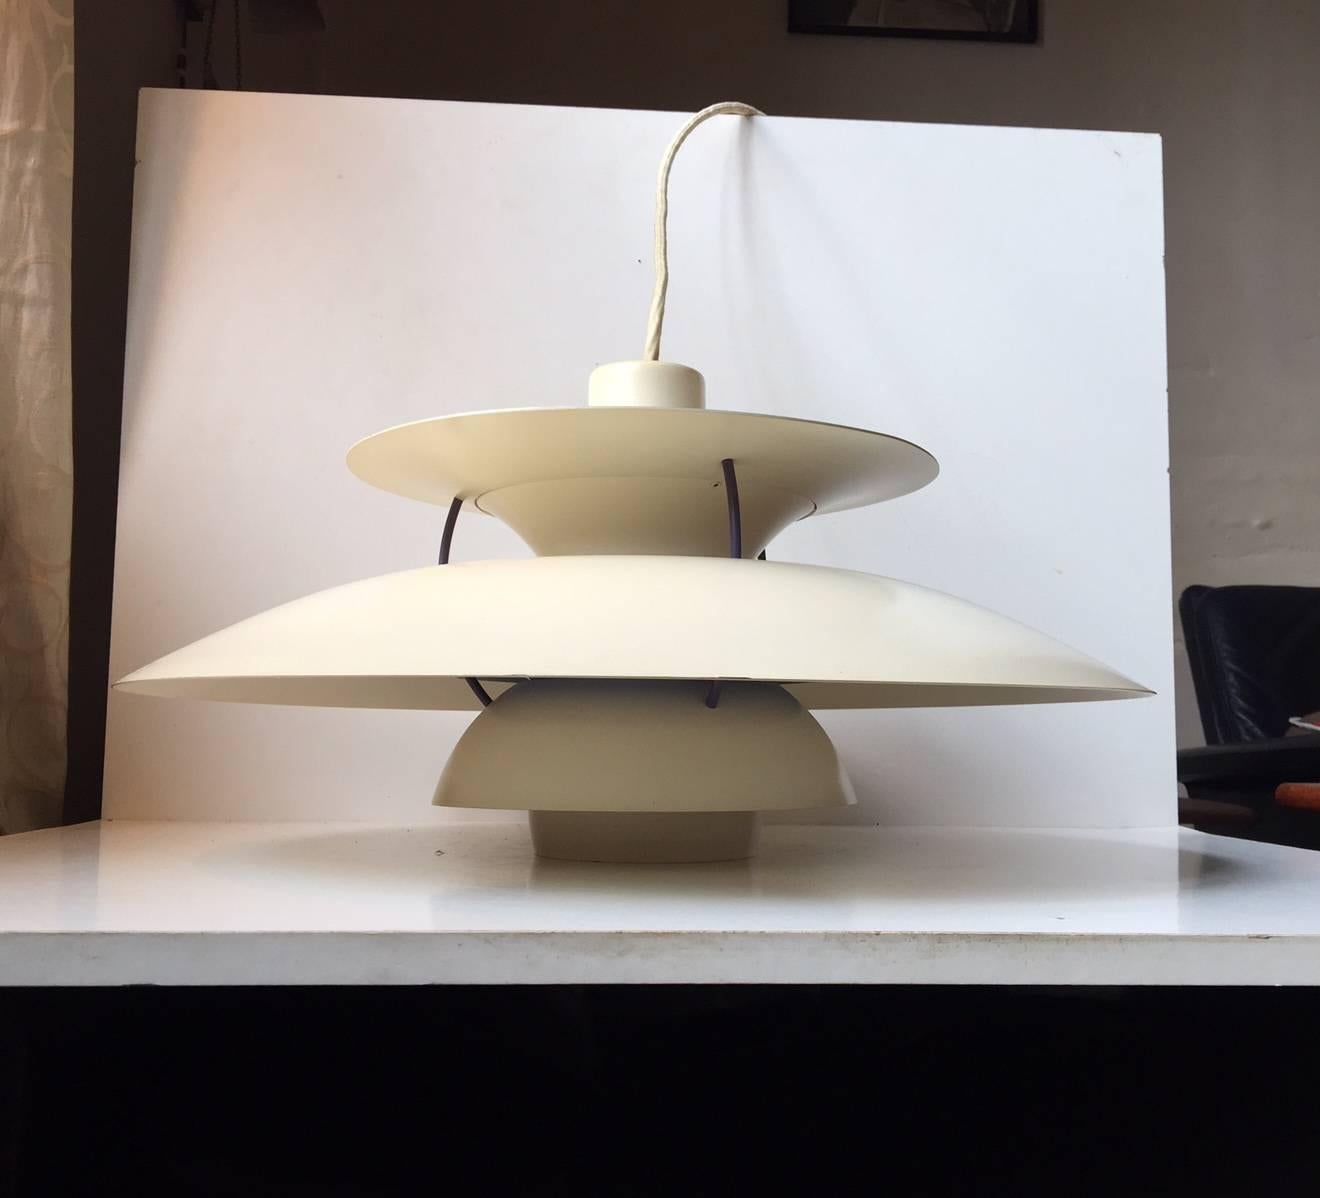 This lamp was designed in the 1950s by Poul Henningsen for Louis Poulsen in Denmark. The piece was designed with the dining room in mind; after mathematical calculations, Henningsen created a lamp which will give maximum light, without seeing the